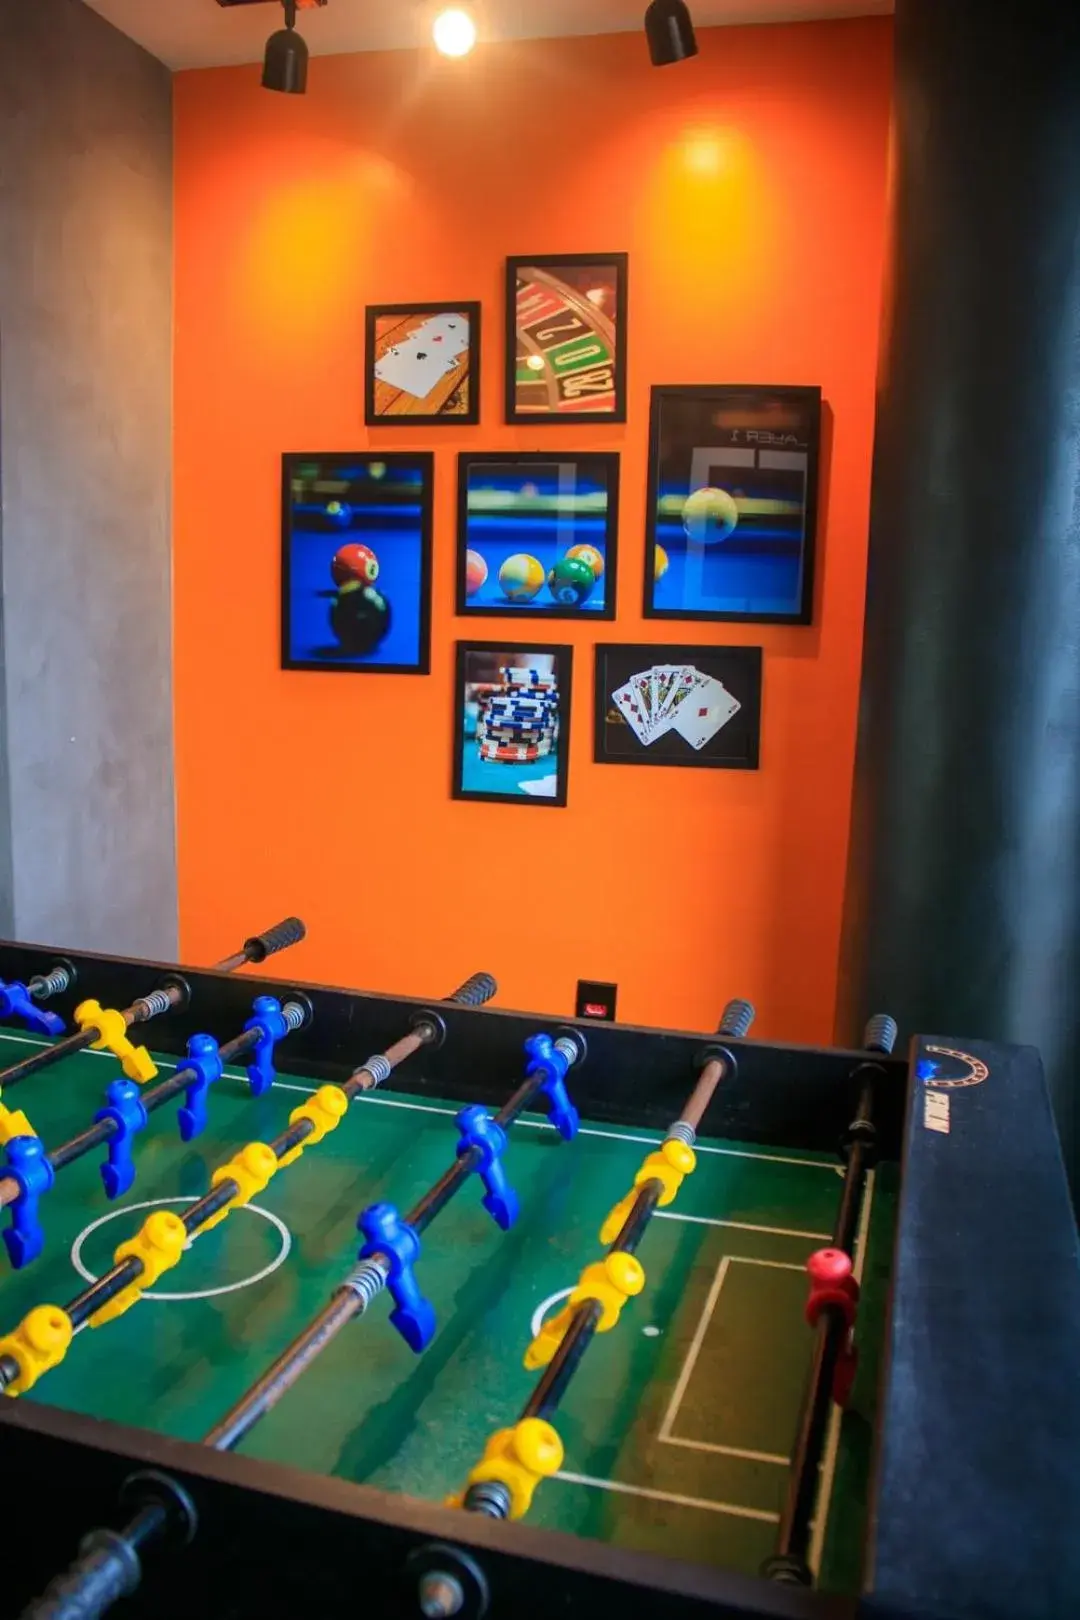 Game Room, Other Activities in Royal Ocean Palace Hotel